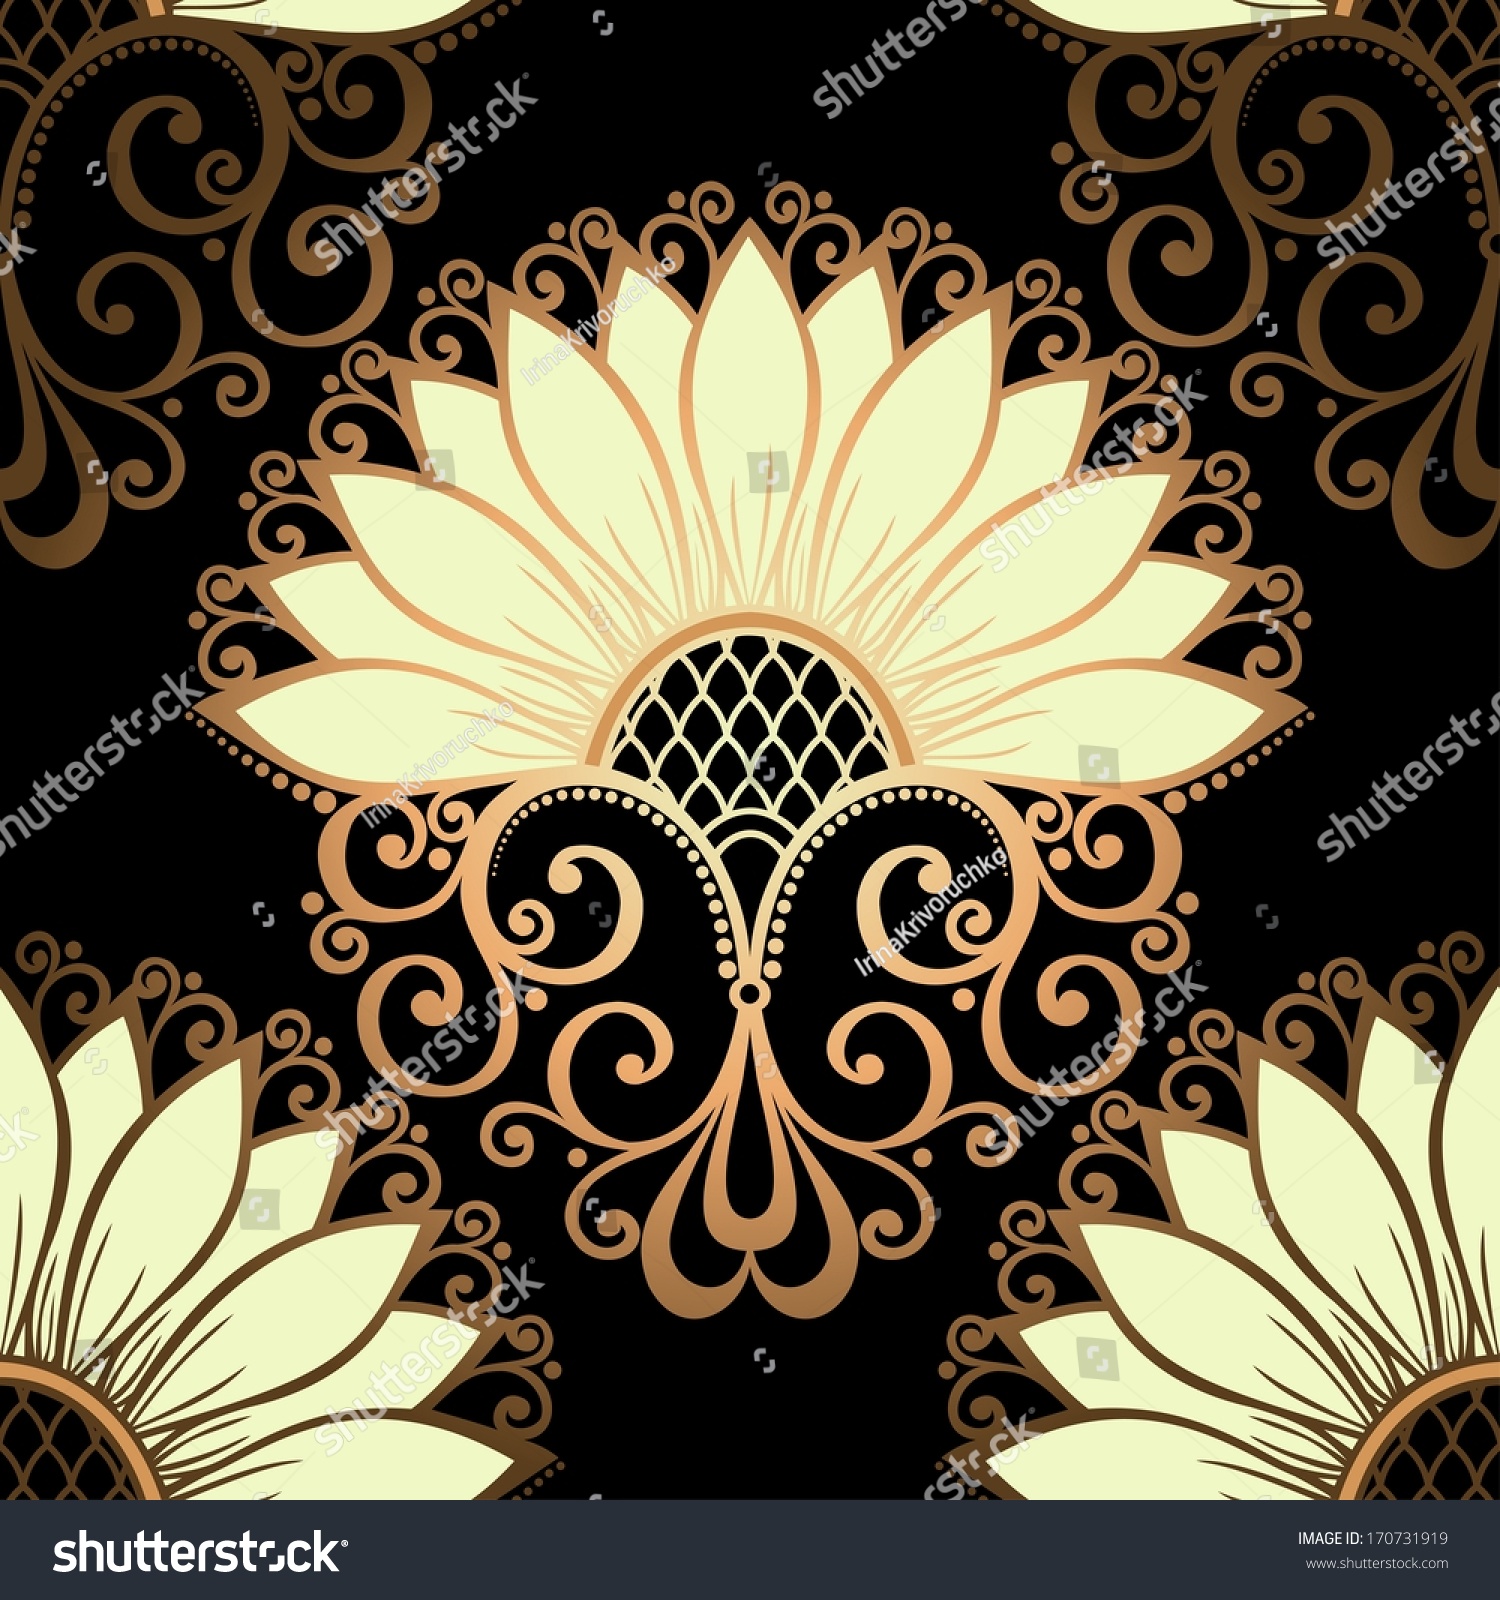 Seamless Ornate Floral Pattern Vector Stock Vector 170731919 ...